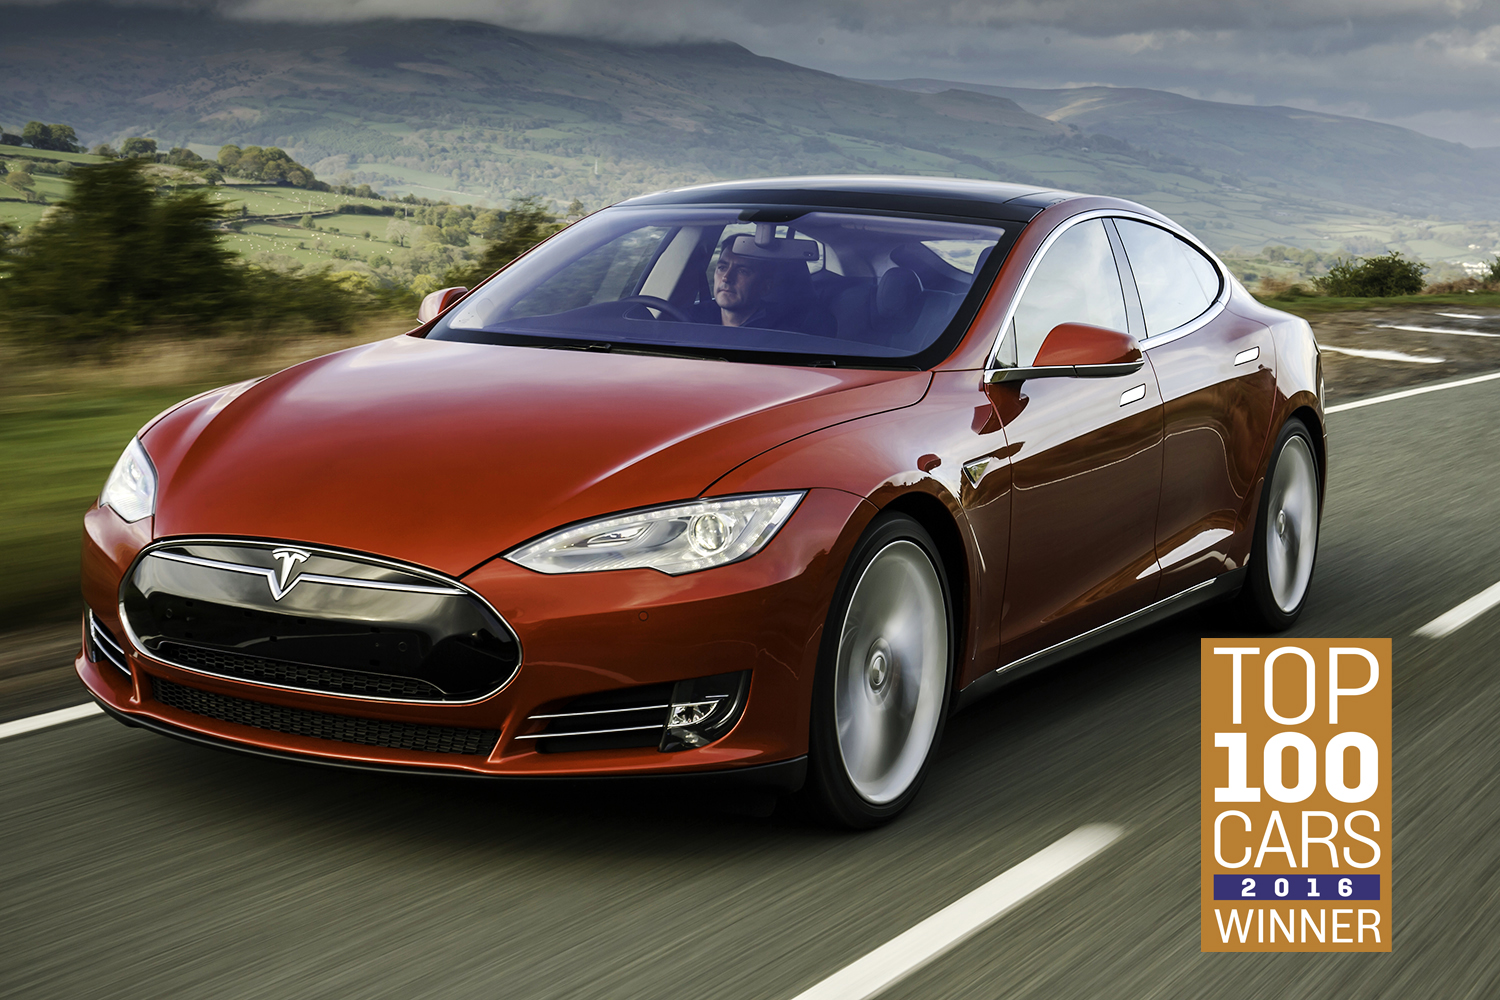 Tesla Model S: The Sunday Times Top 100 Cars - Top 5 Electric & Hybrid cars